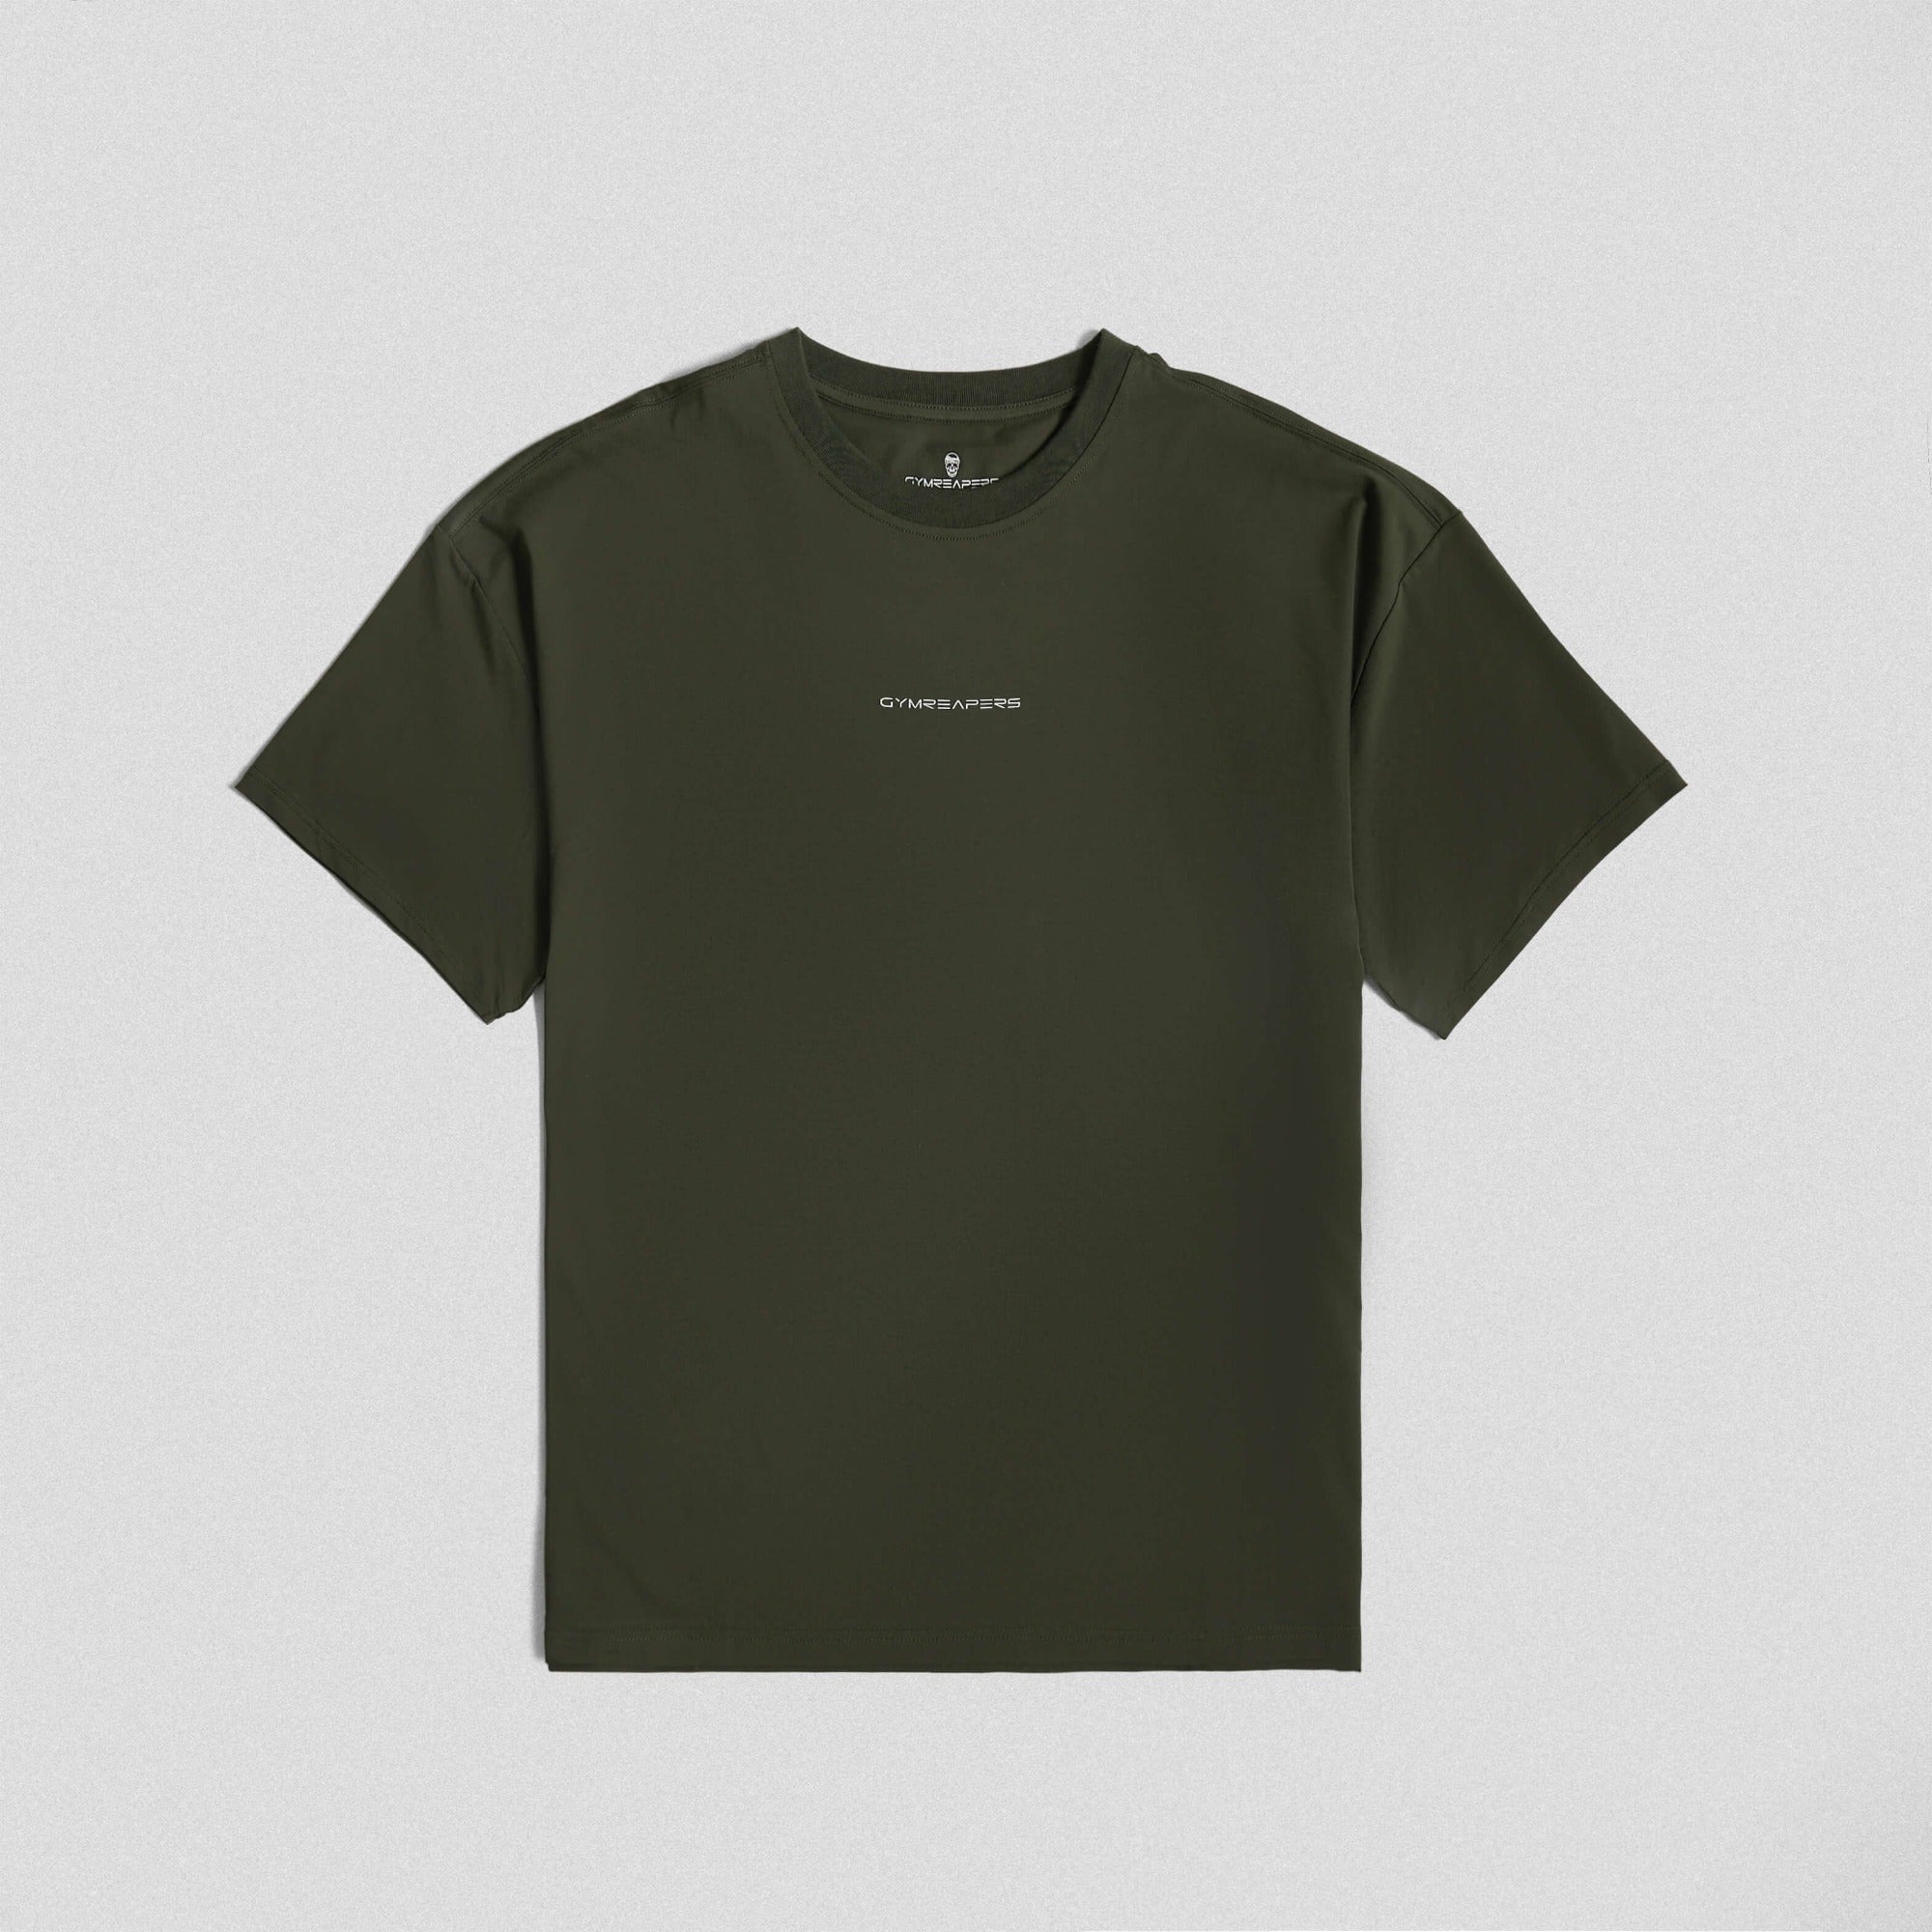 od green box tee front